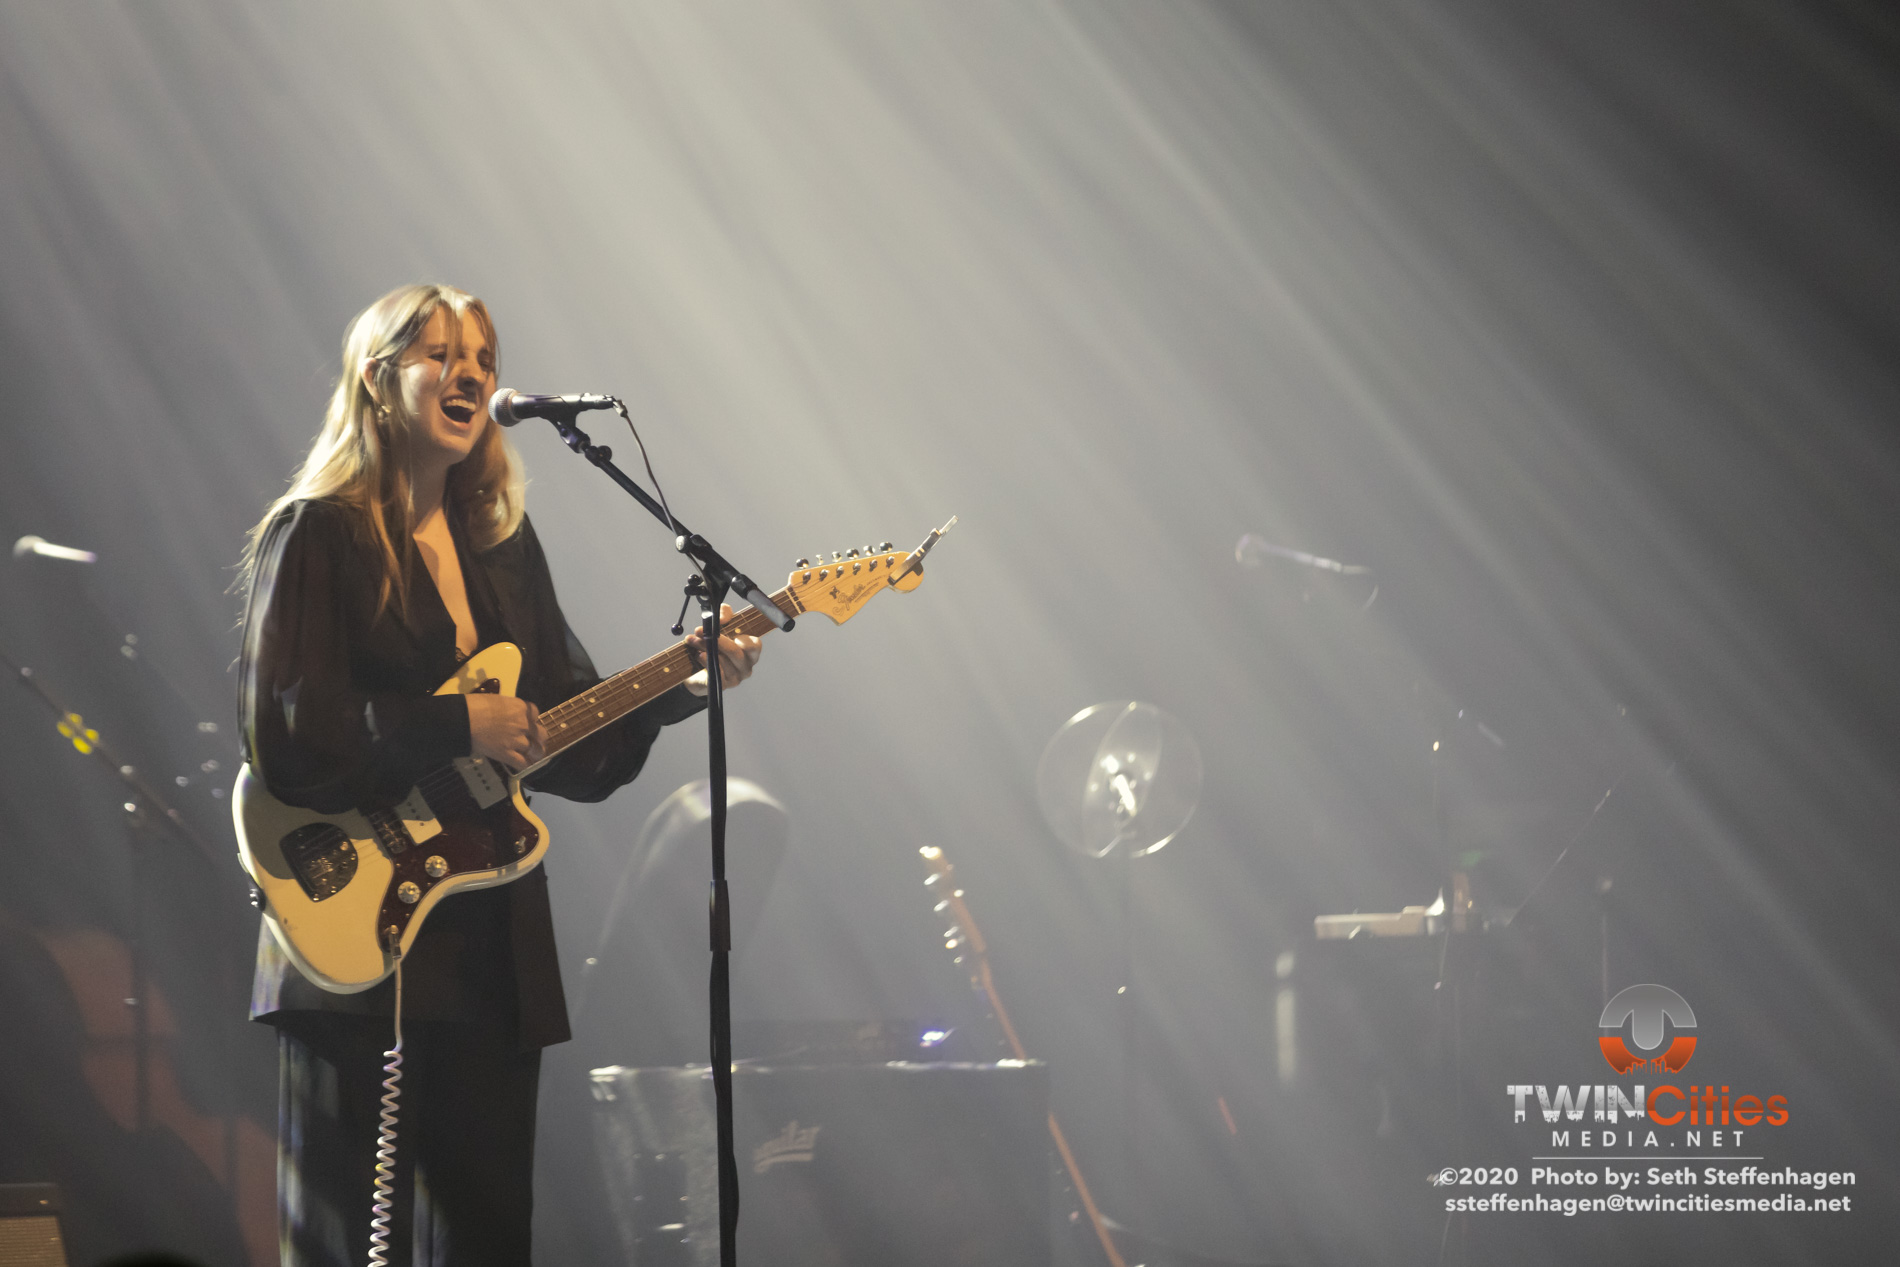 February 14, 2020 - Saint Paul, Minnesota, United States -  Madison Cunningham live in concert at the Palace Theatre opening for Calexico And Iron & Wine.

(Photo by Seth Steffenhagen/Steffenhagen Photography)